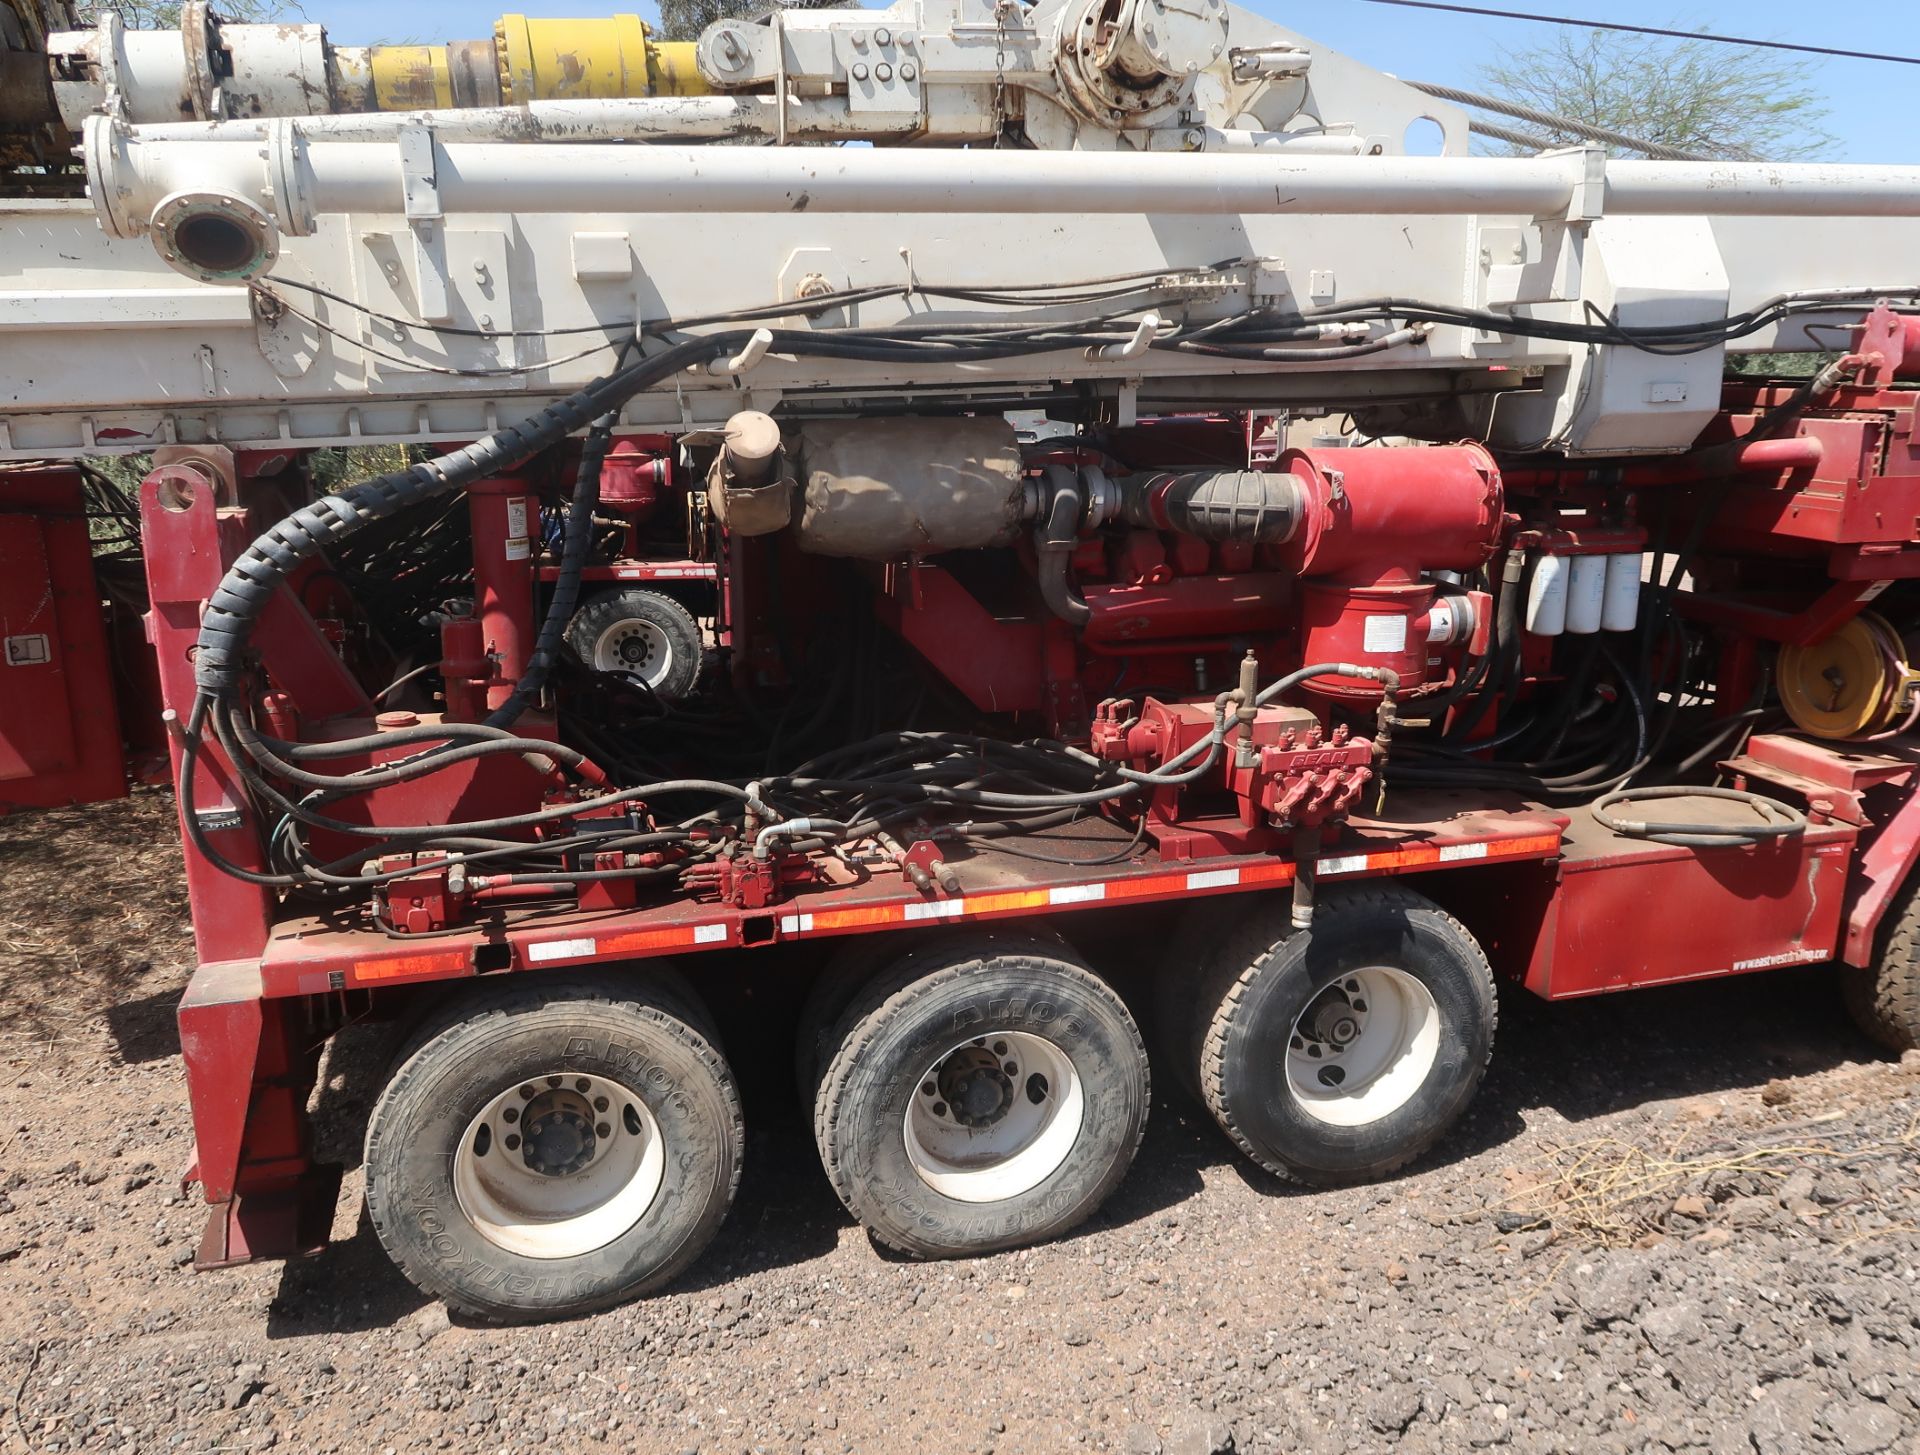 2006 SCHRAMM T-130XD DRILL RIG, SN. J130-0135 MOUNTED ON CRANE CARRIER, VIN. 1CYDGV6846T046987 - Image 12 of 18